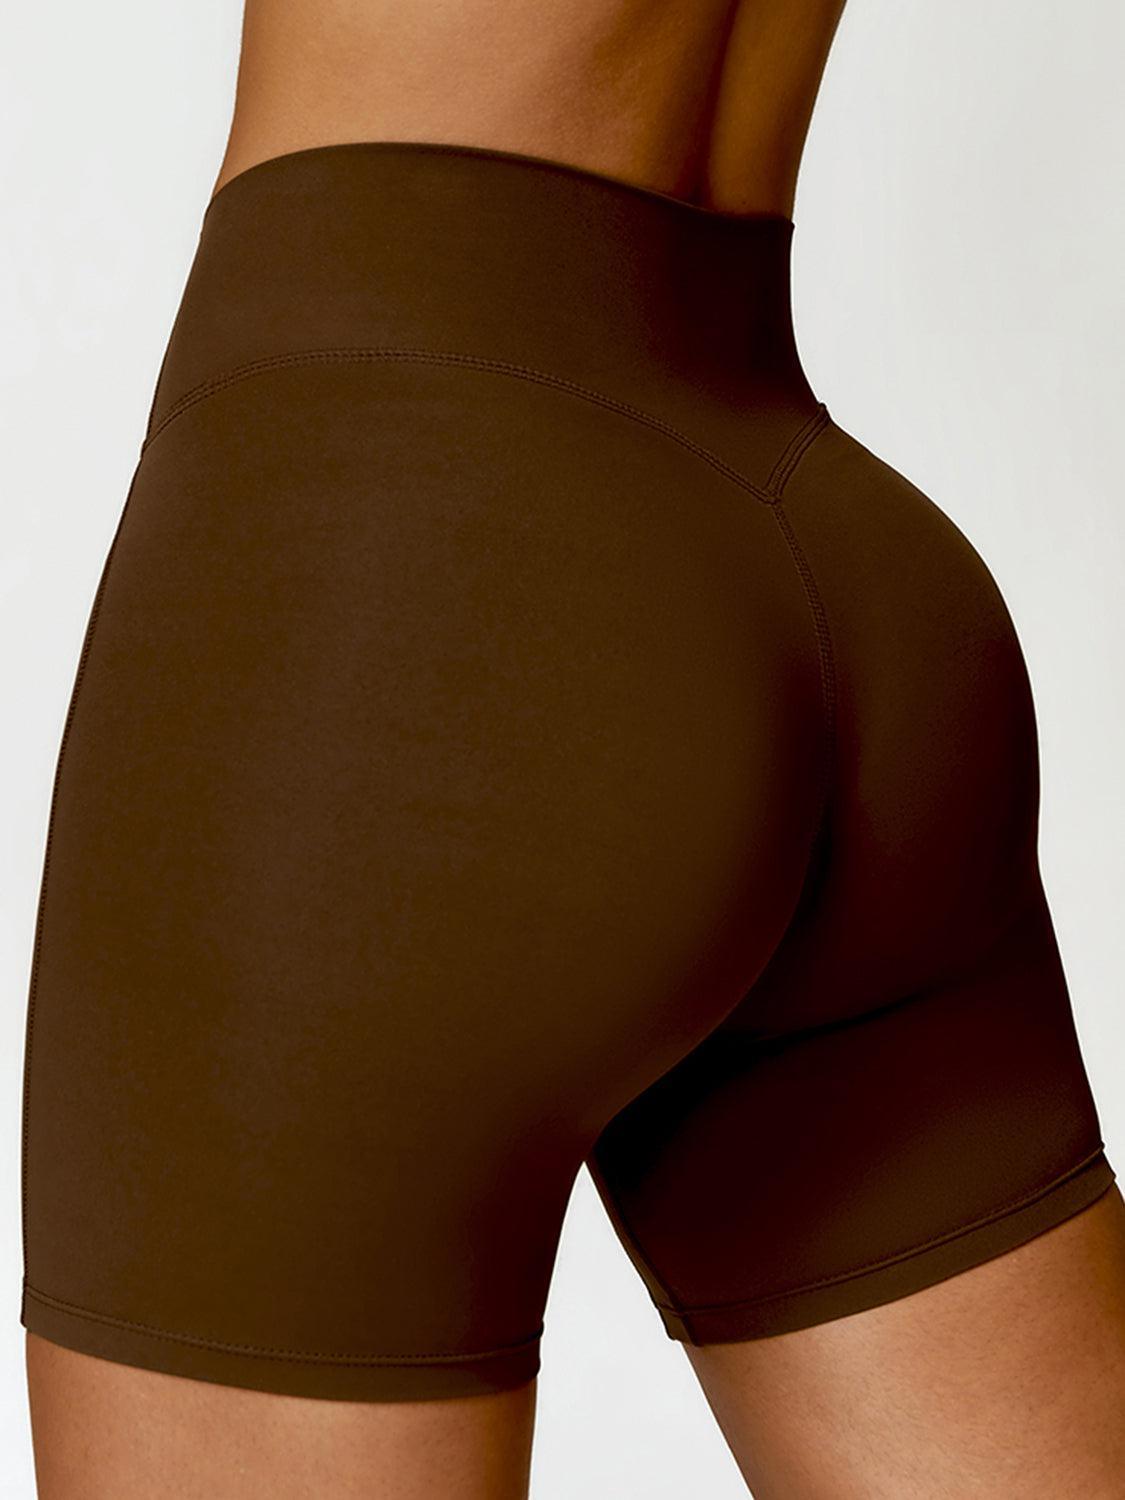 a close up of a woman's butt in a brown shorts